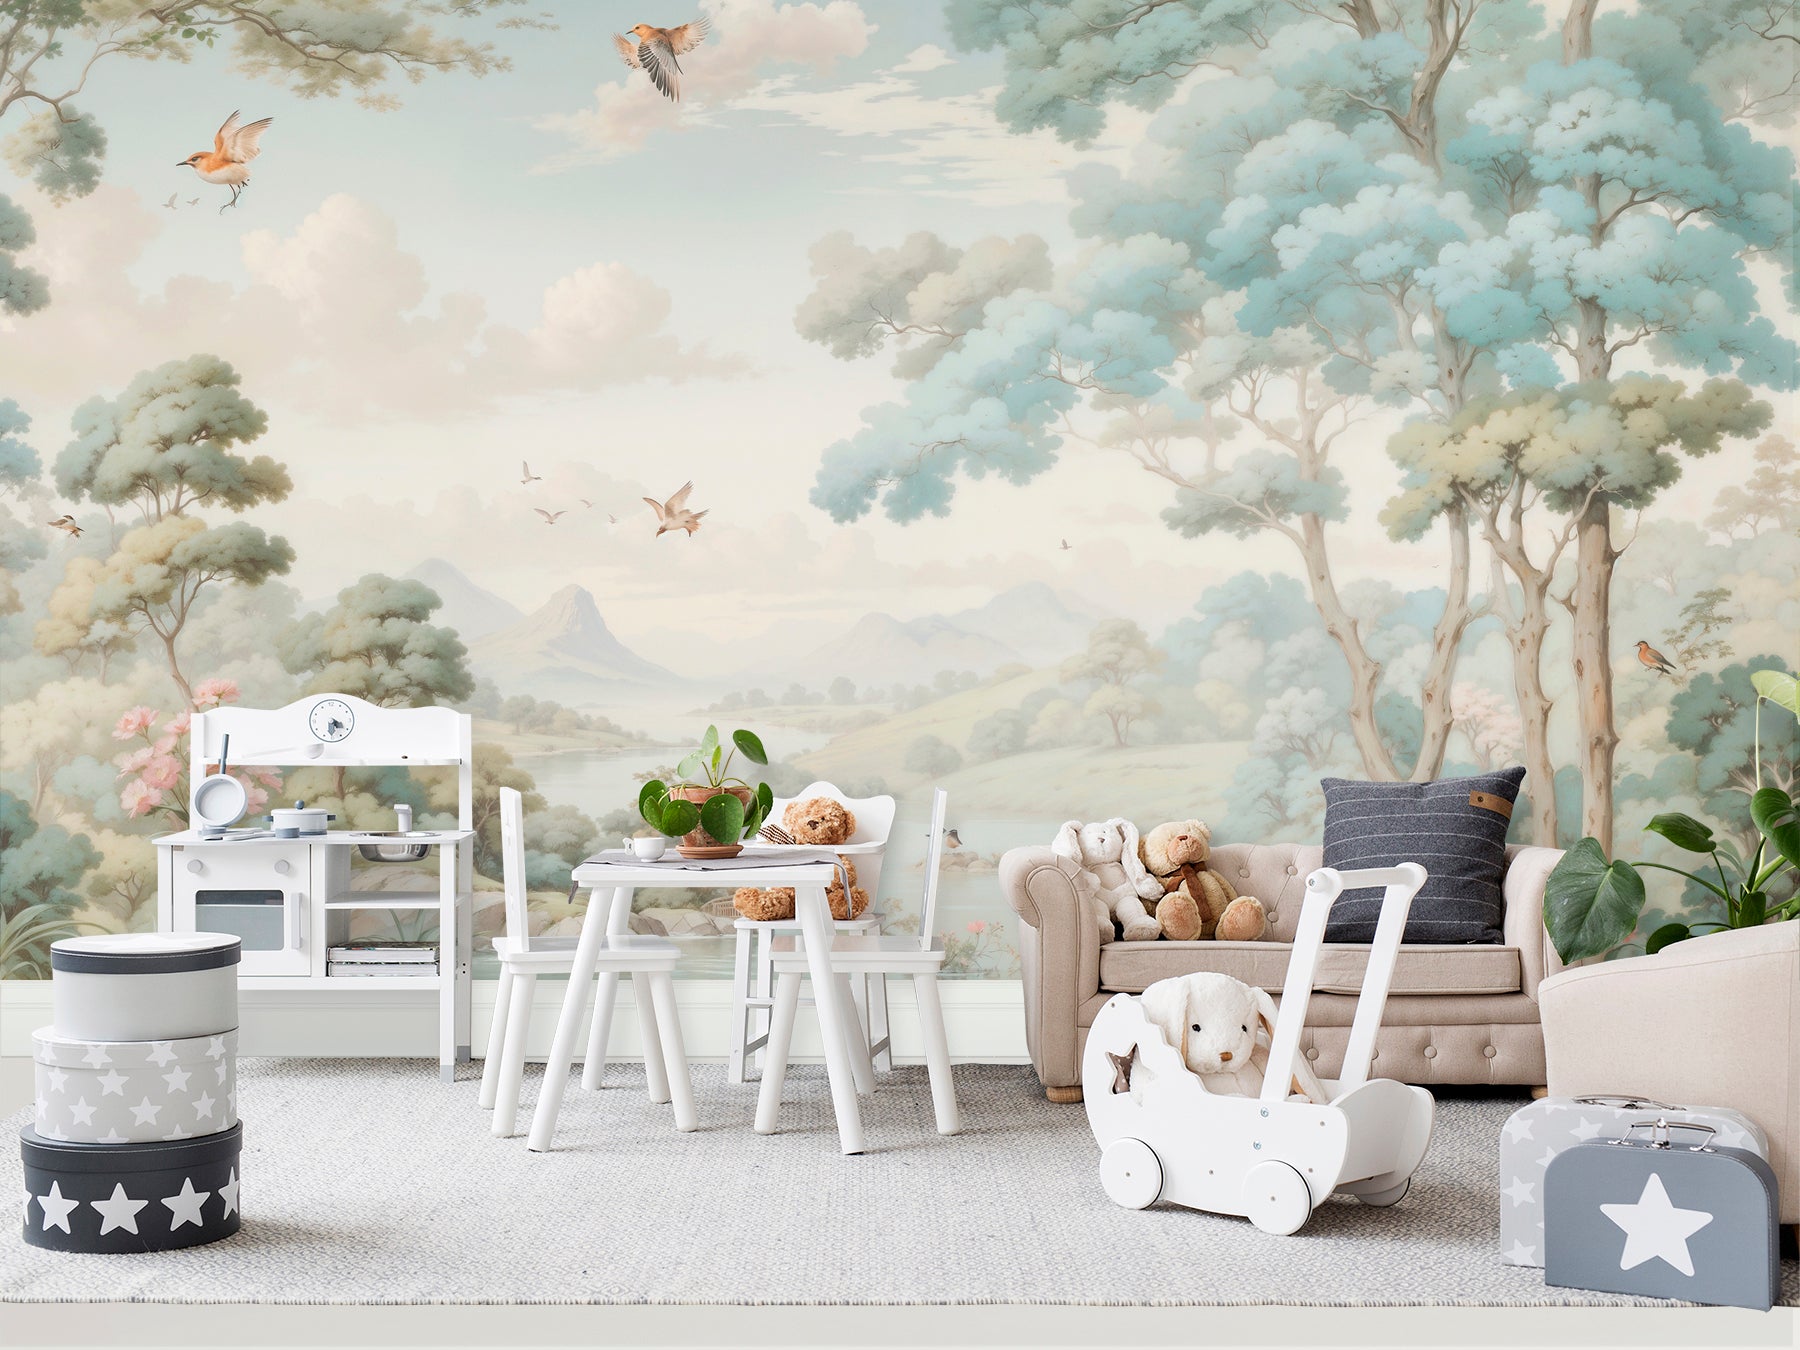 Children's playroom decorated with a pastoral Loire Valley mural featuring rolling hills, trees, and flying birds, accompanied by child-friendly furniture."